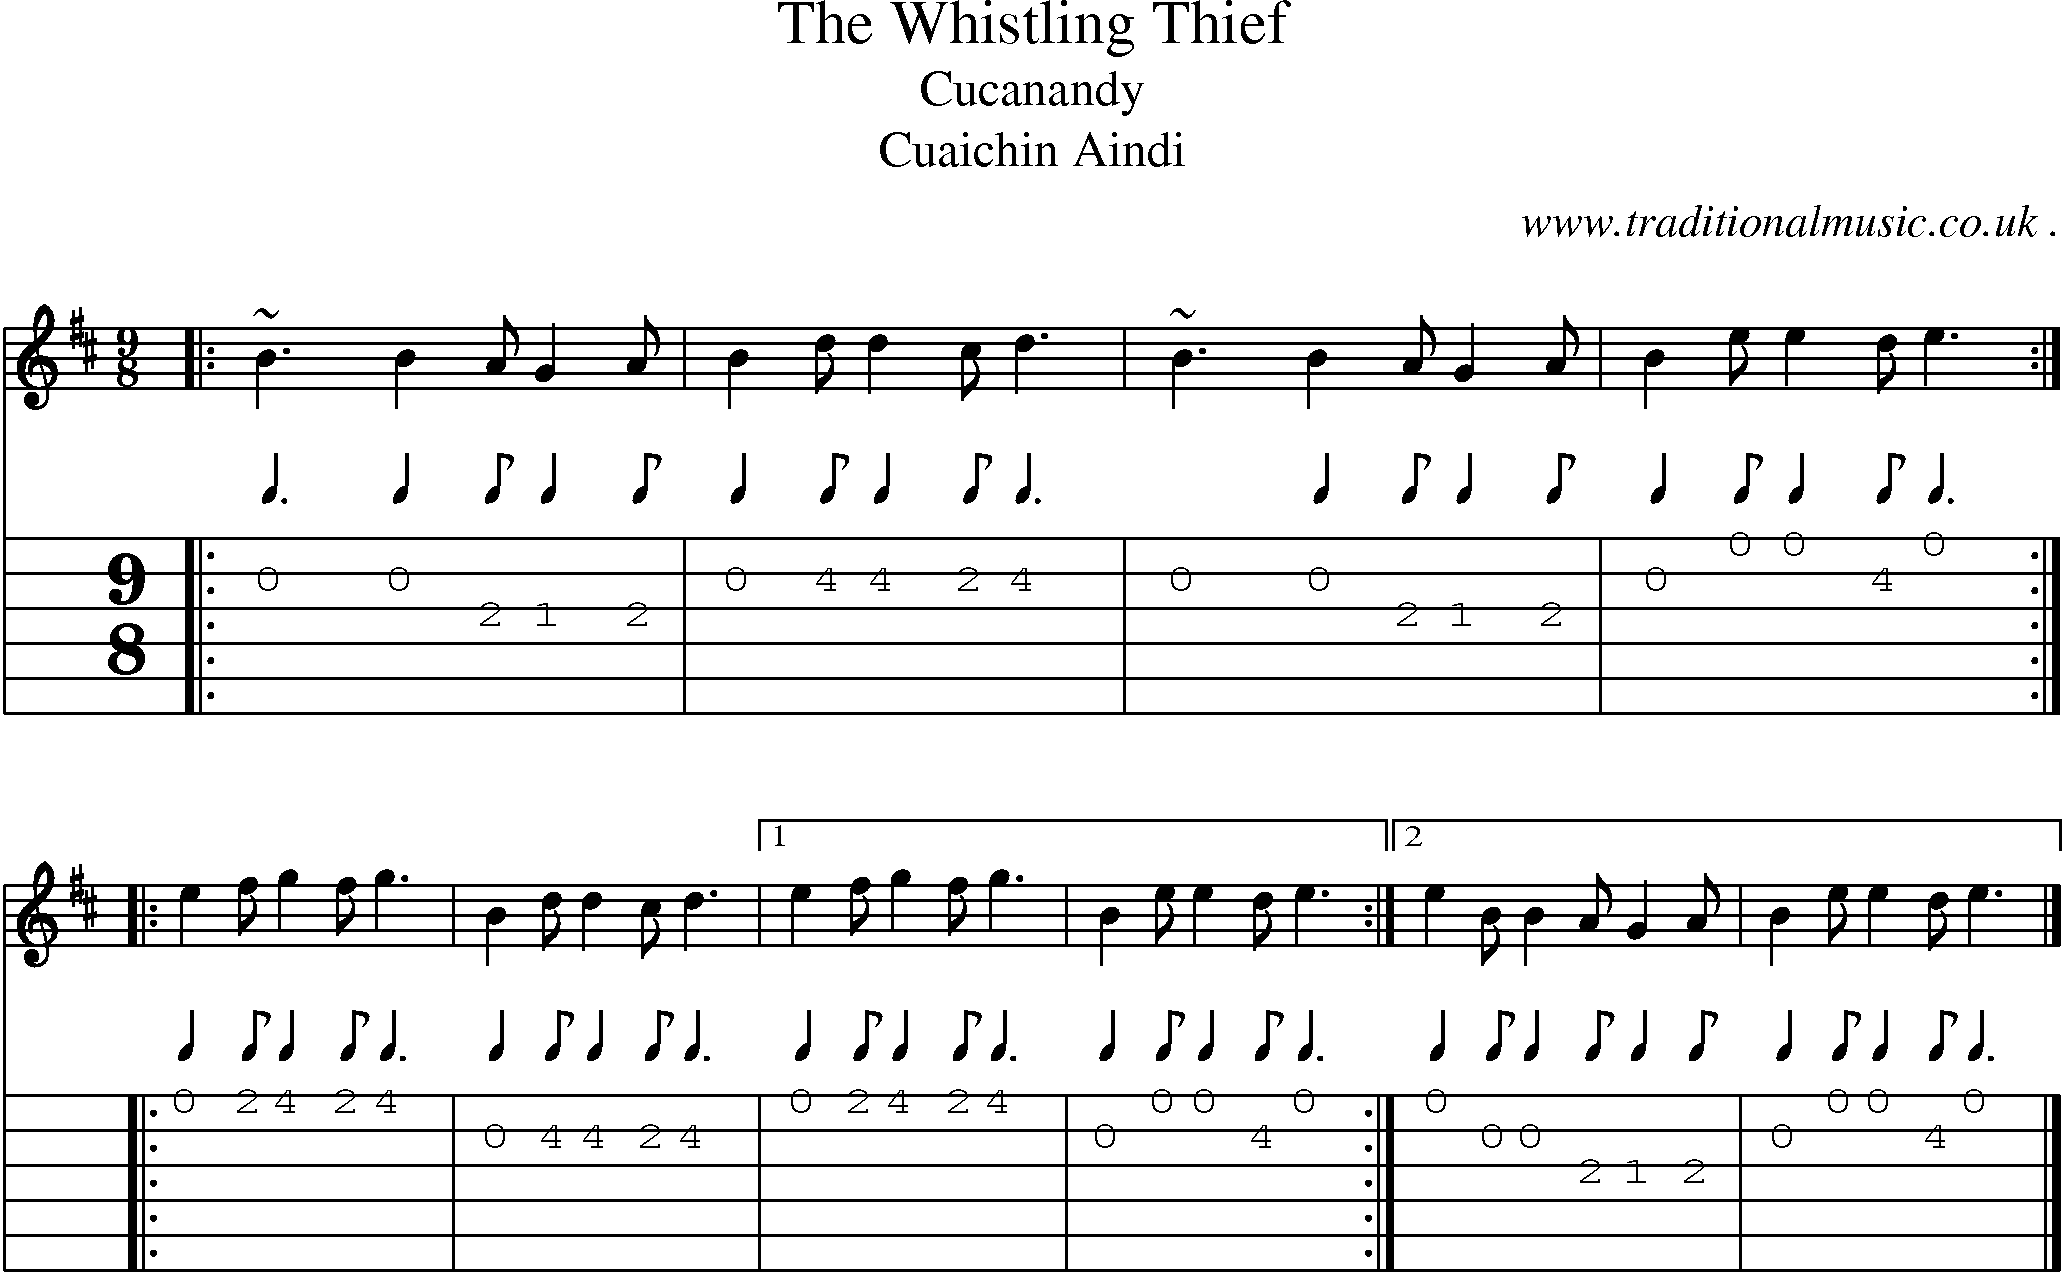 Sheet-music  score, Chords and Guitar Tabs for The Whistling Thief